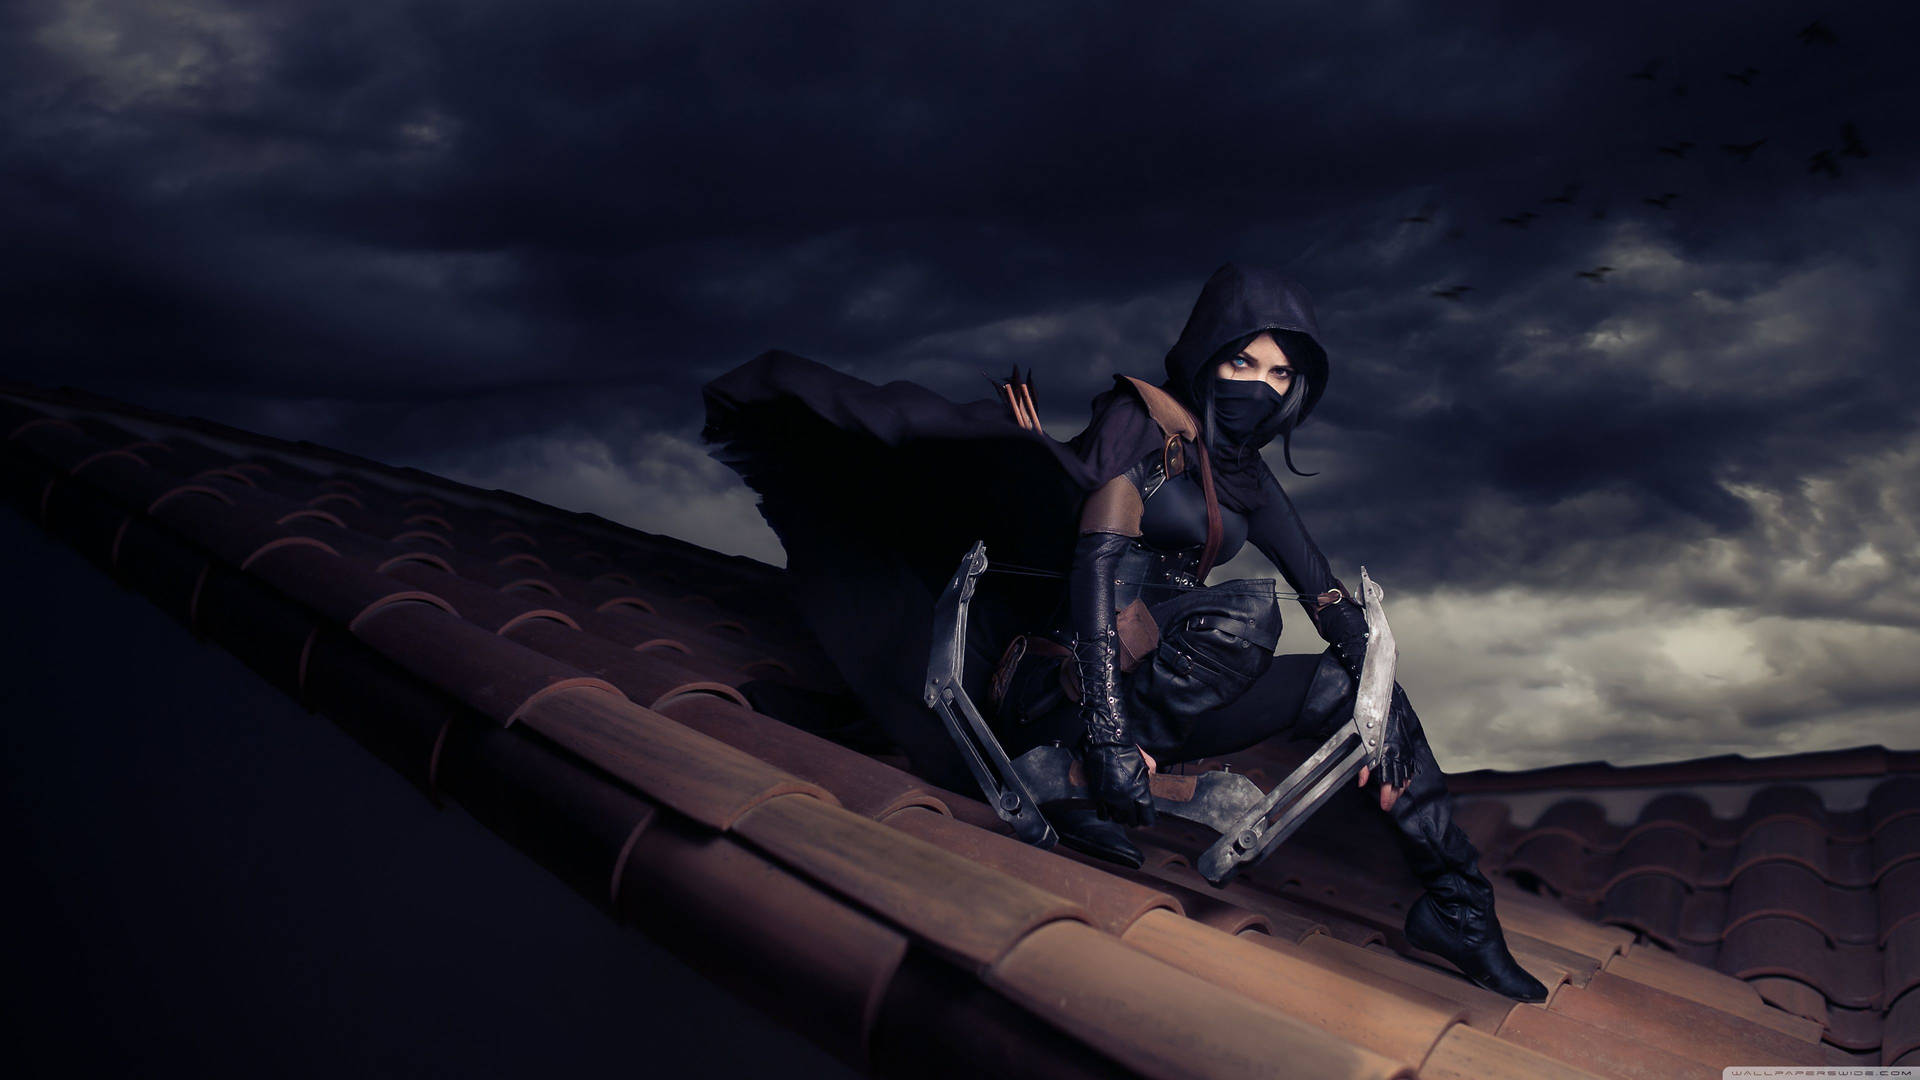 Thief On Rooftop Wallpaper